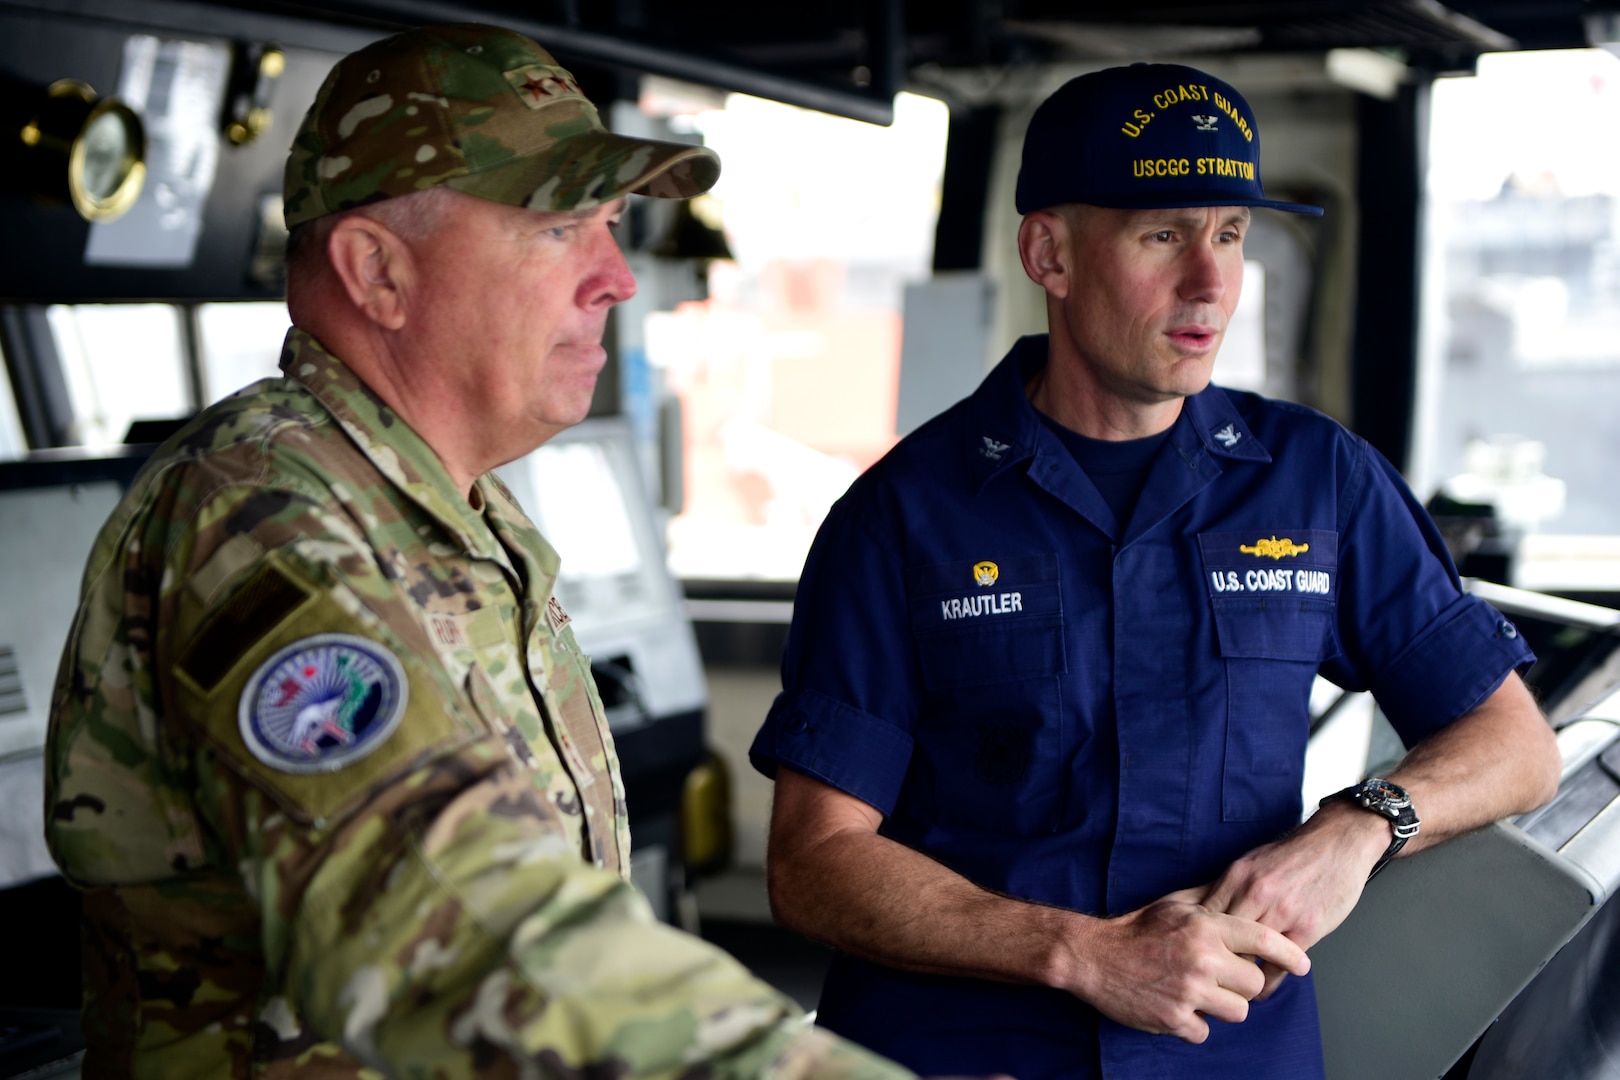 Lt. Gen. Ricky N. Rupp, commander, U.S. Forces Japan, visits Coast Guard Cutter Stratton (752), at U.S. Fleet Activities, Yokosuka, Japan, April 30, 2023. While on a Western Pacific patrol, the Stratton made a port call in Yokosuka to engage in professional exchanges and maritime collaborative engagements with partner nations during the deployment, which will strengthen relationships with ally and partner coast guards and navies throughout the Indo-Pacific. (U.S. Coast Guard photo by Petty Officer 2nd Class Michael Clark)